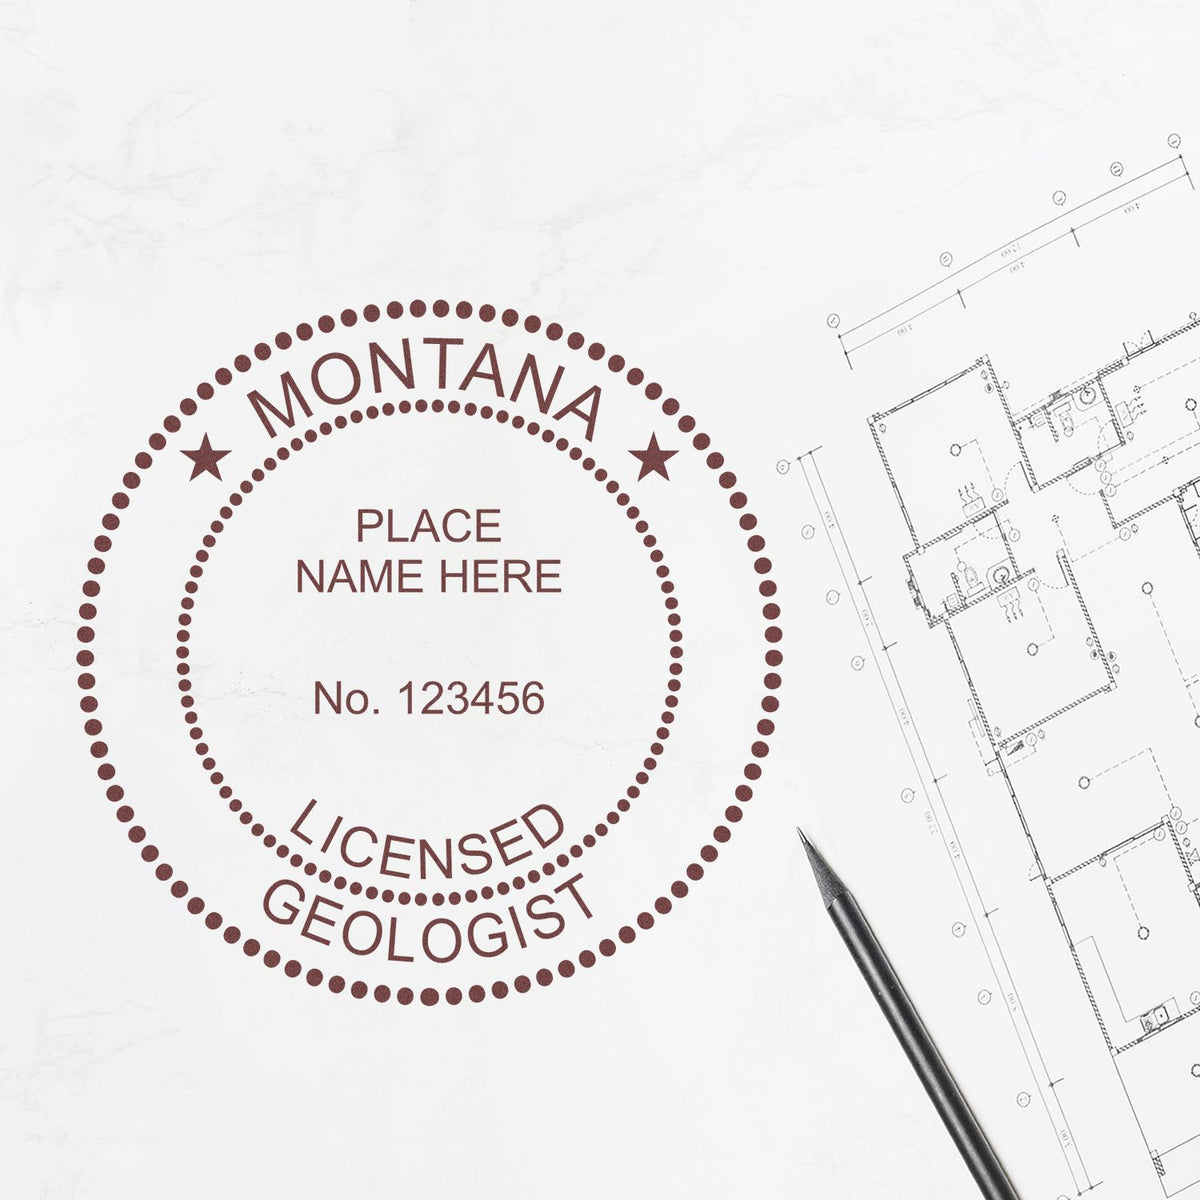 Another Example of a stamped impression of the Digital Montana Geologist Stamp, Electronic Seal for Montana Geologist on a office form